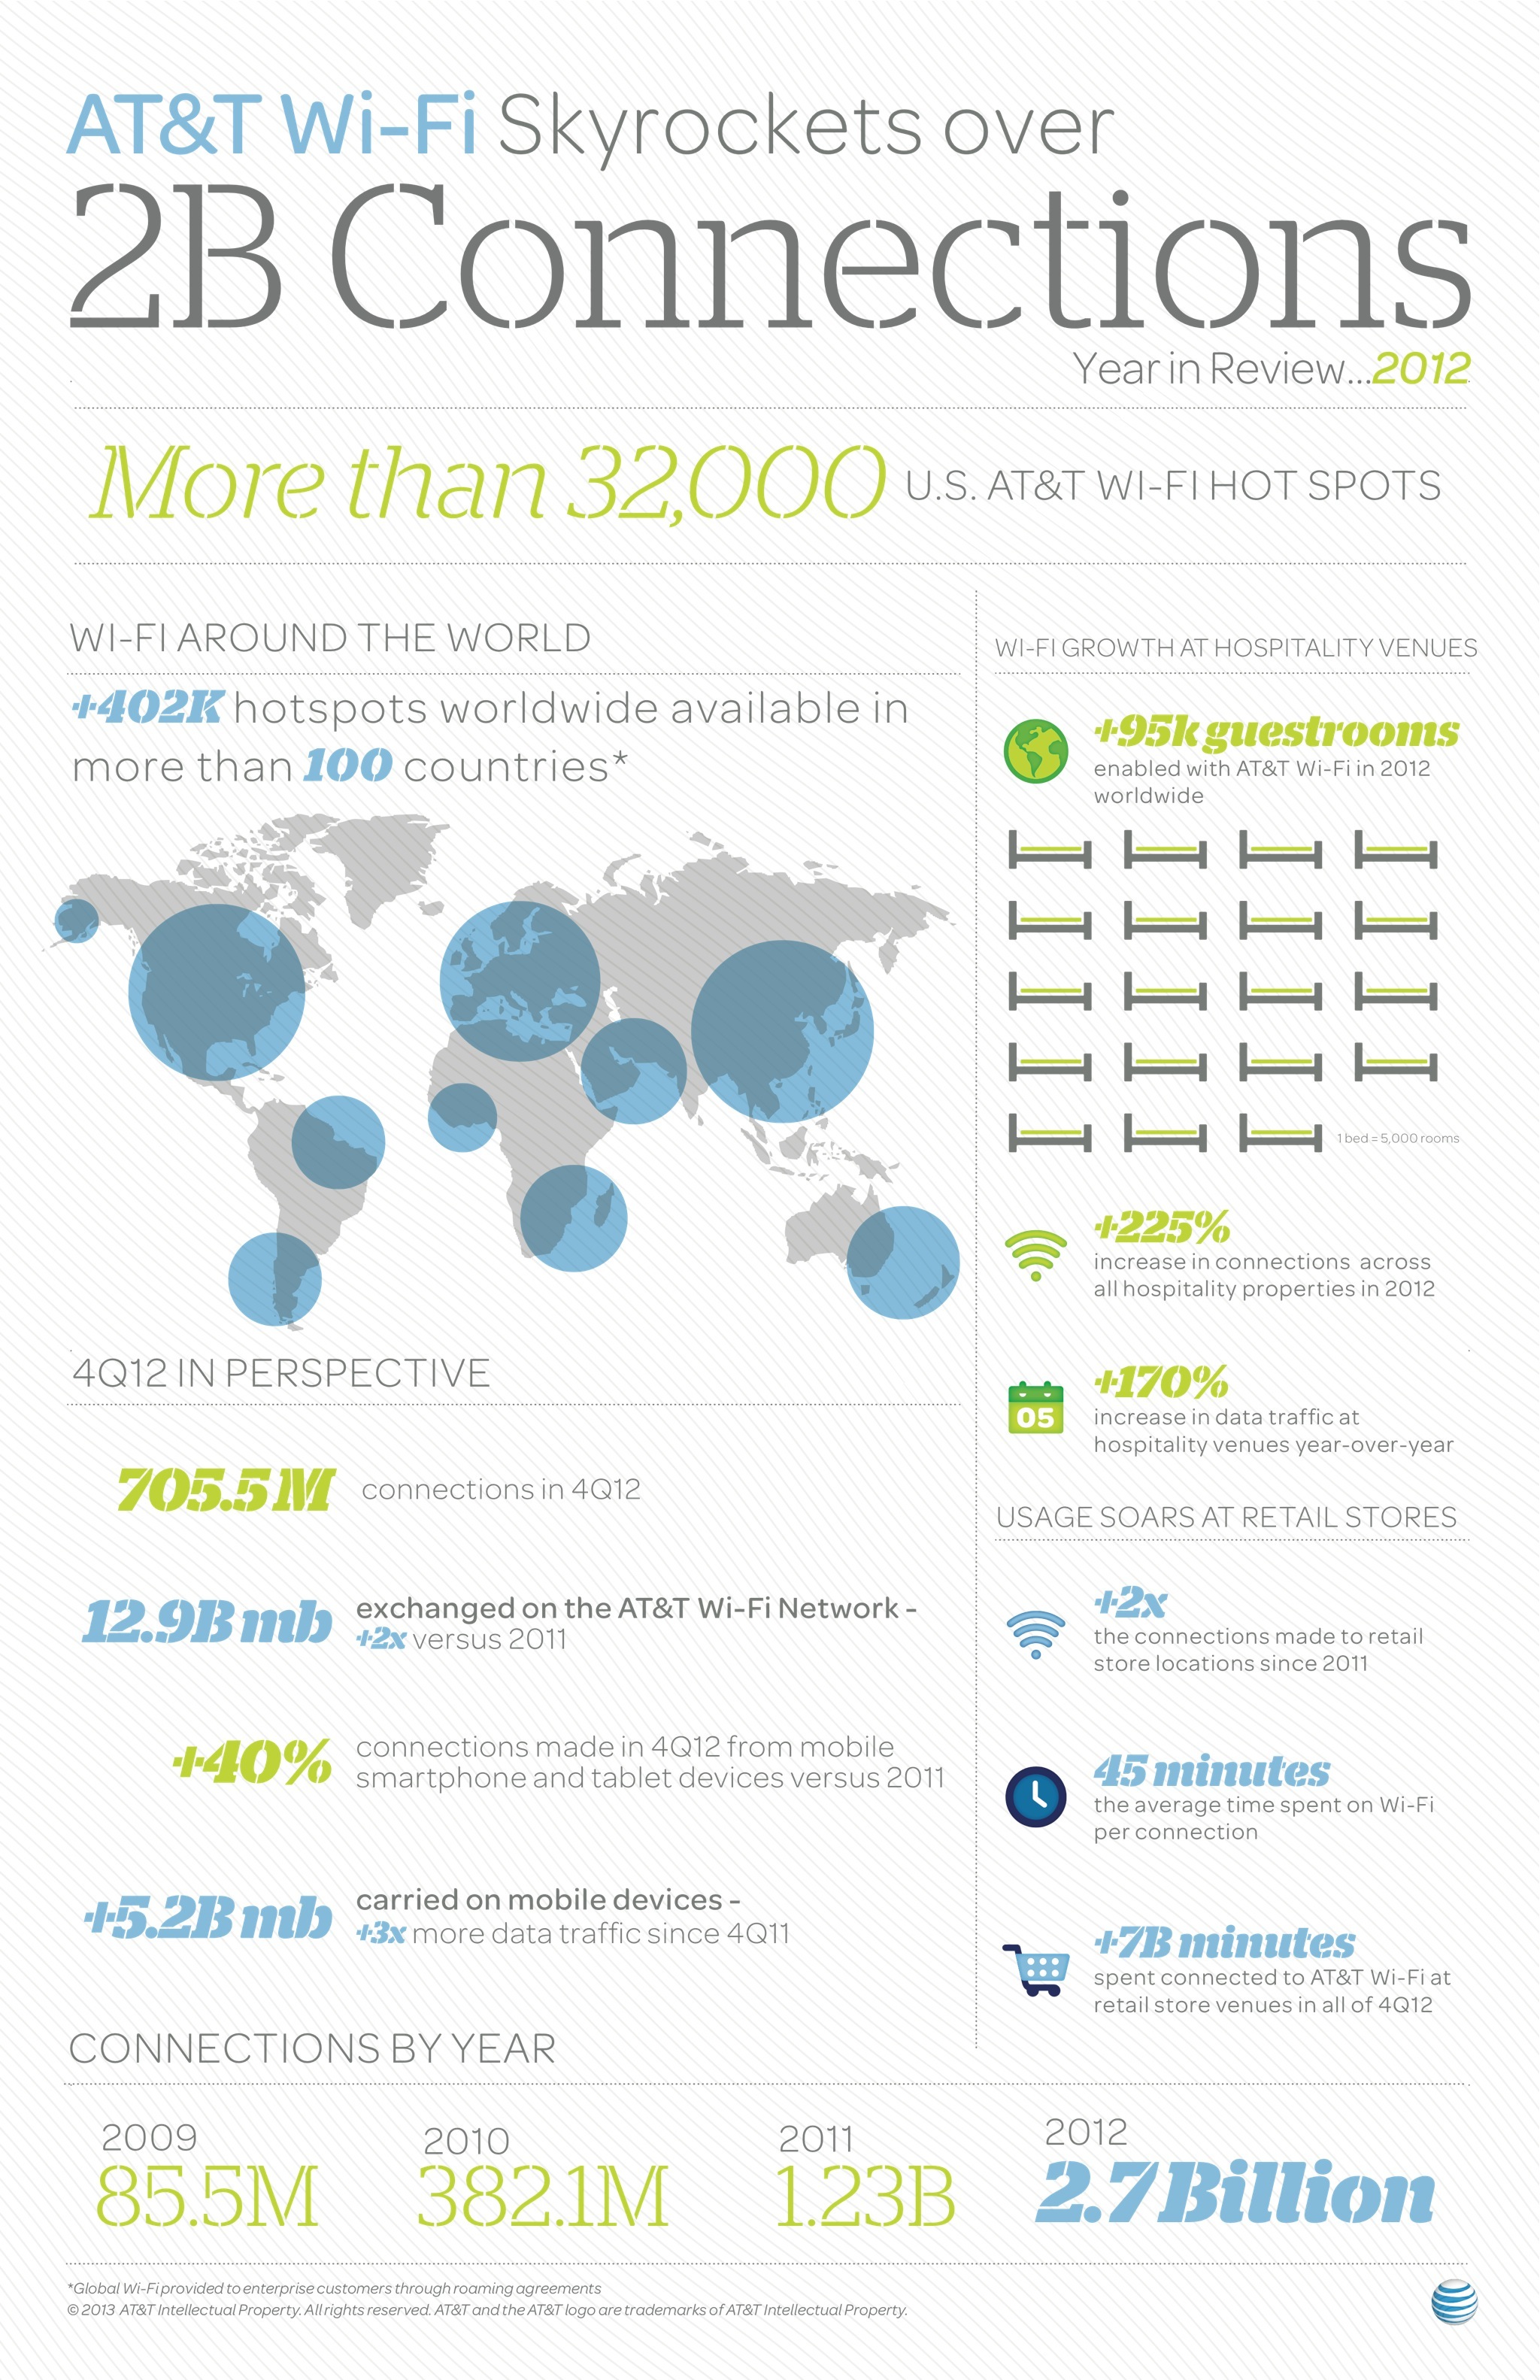 ATT Wi-Fi 2012 connections infographic